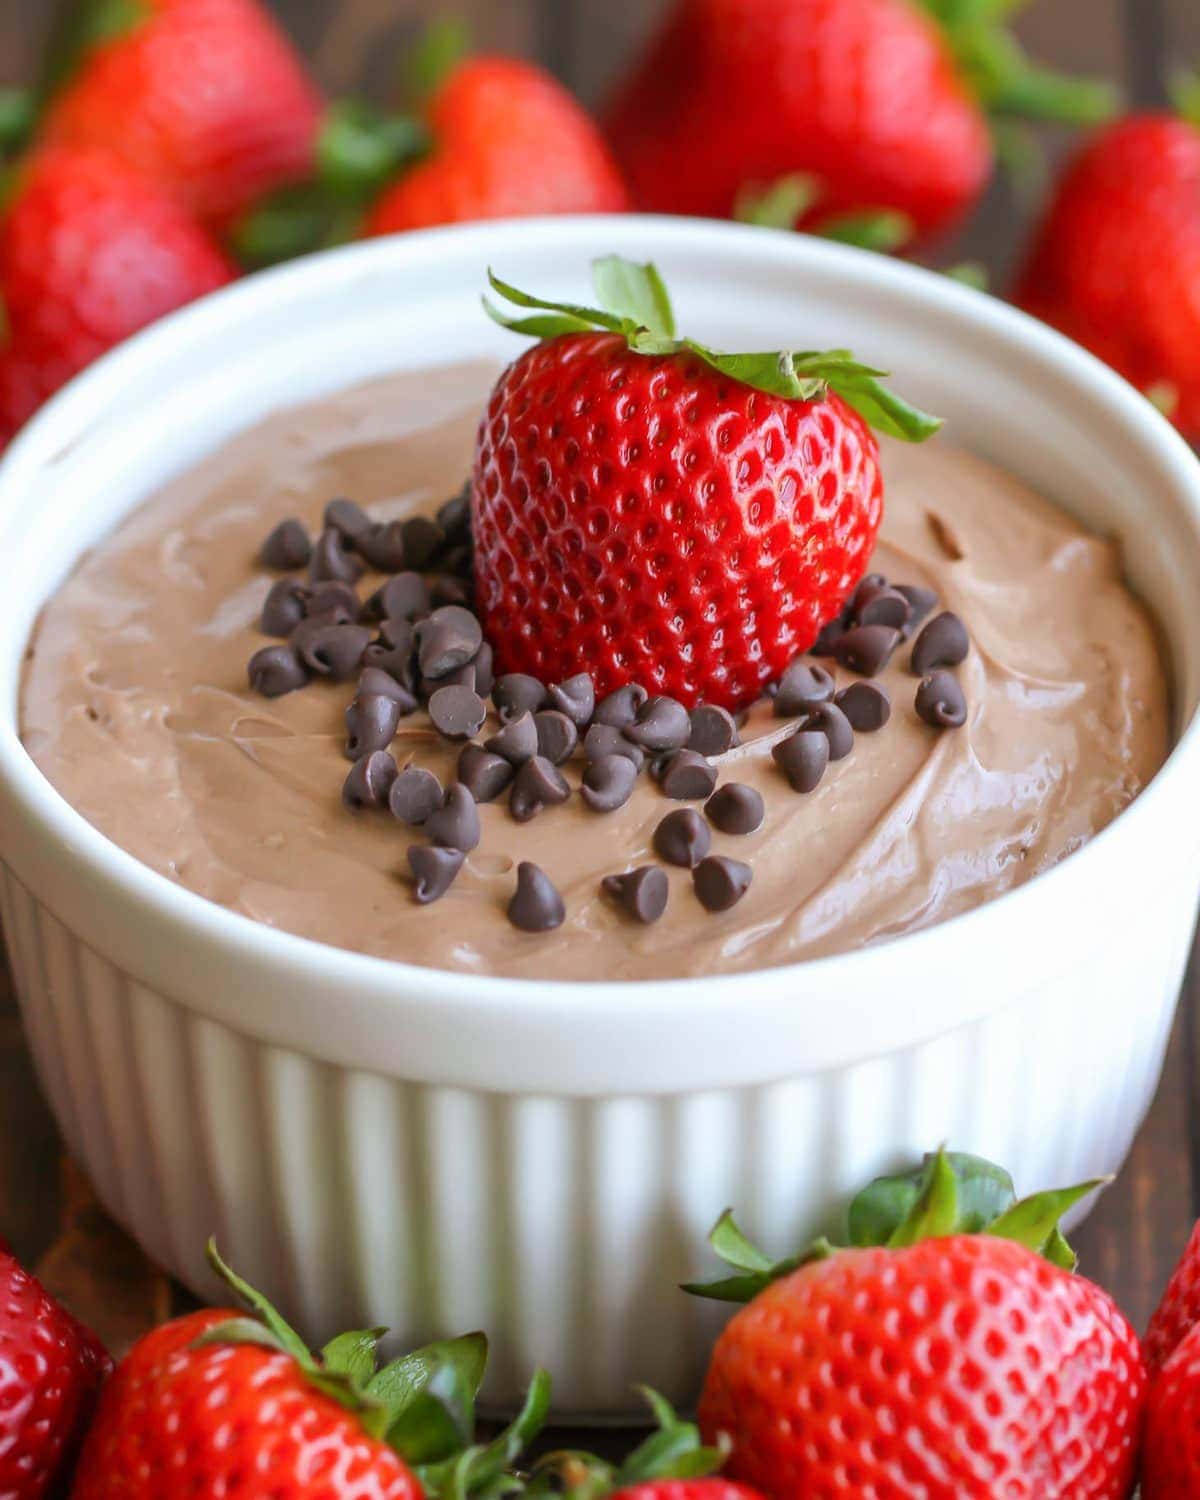 Cold appetizers - nutella dip served with fresh strawberries.